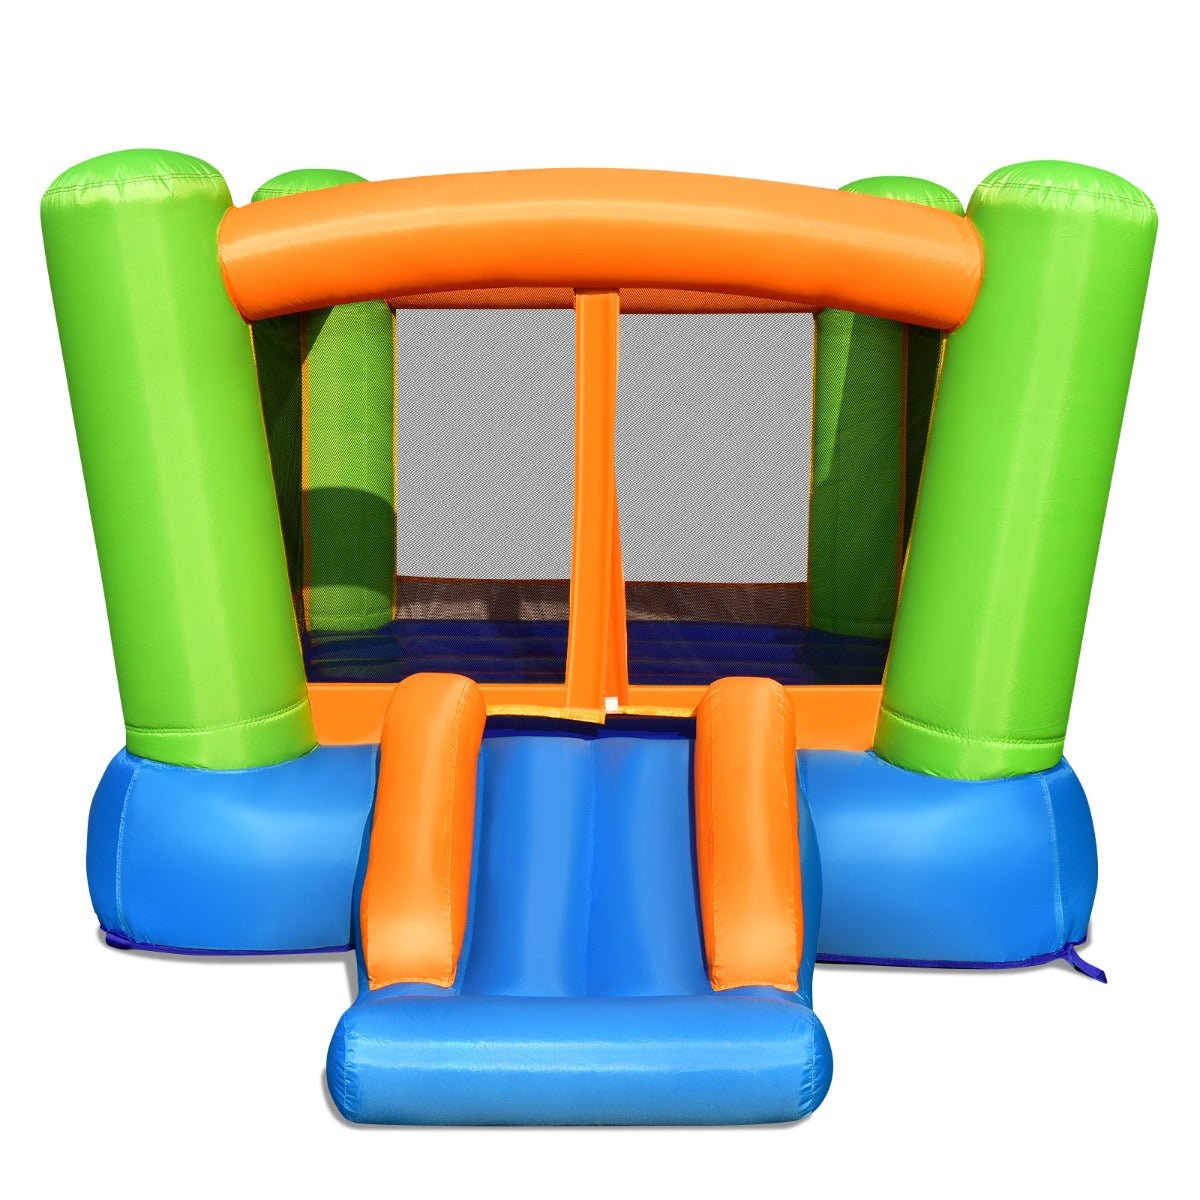 Quality Inflatable Bounce House at Kids Mega Mart - Shop Today!